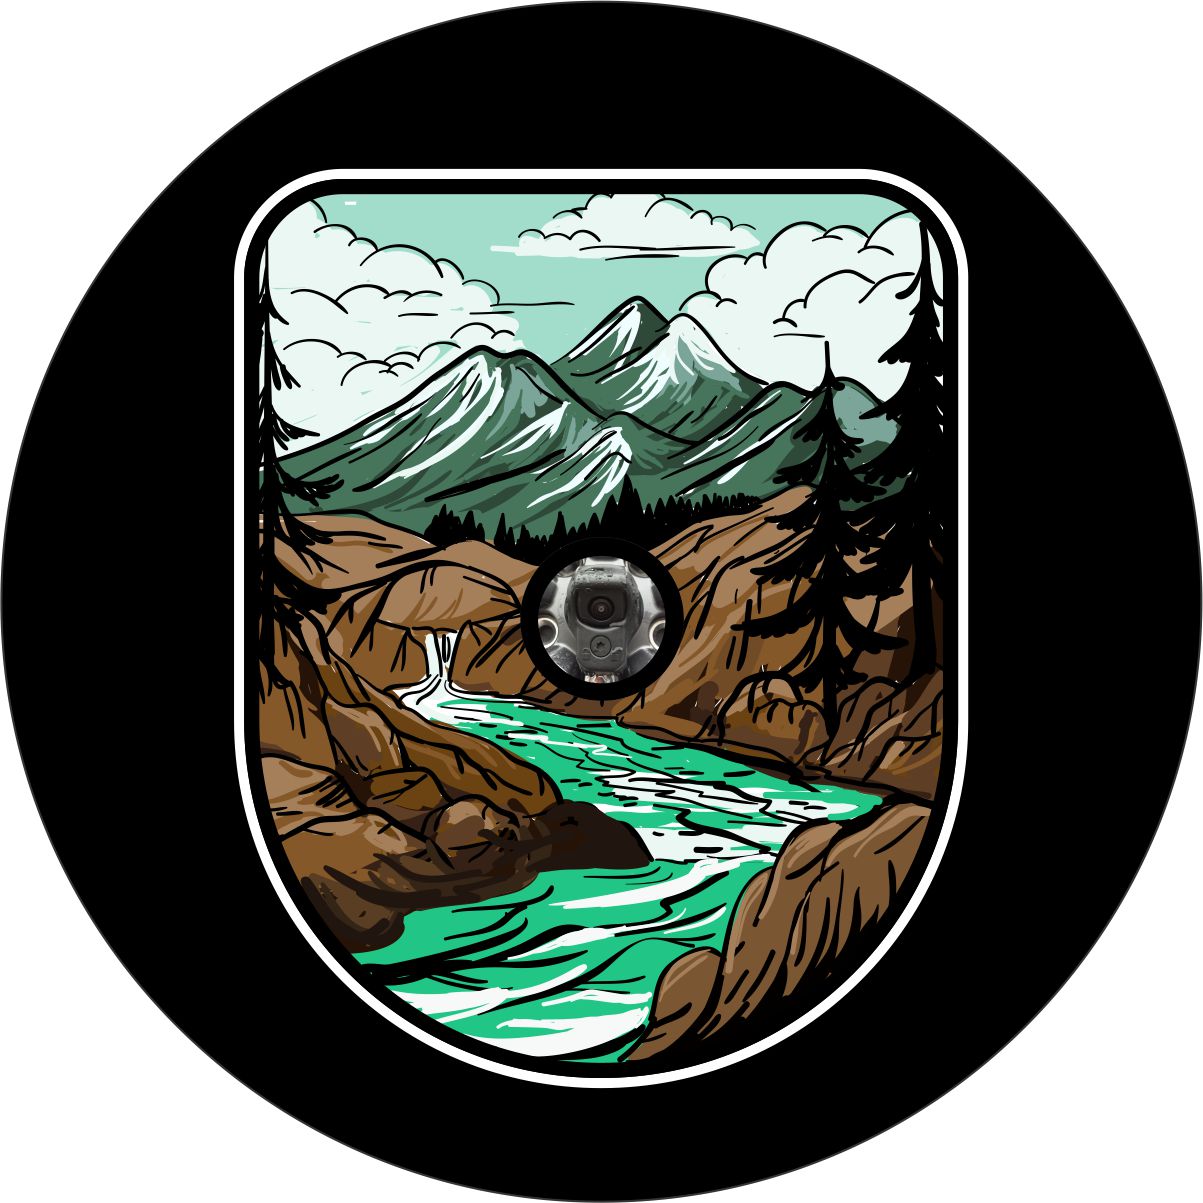 Mountains and river art inspired spare tire cover design with a hole for a back up camera.